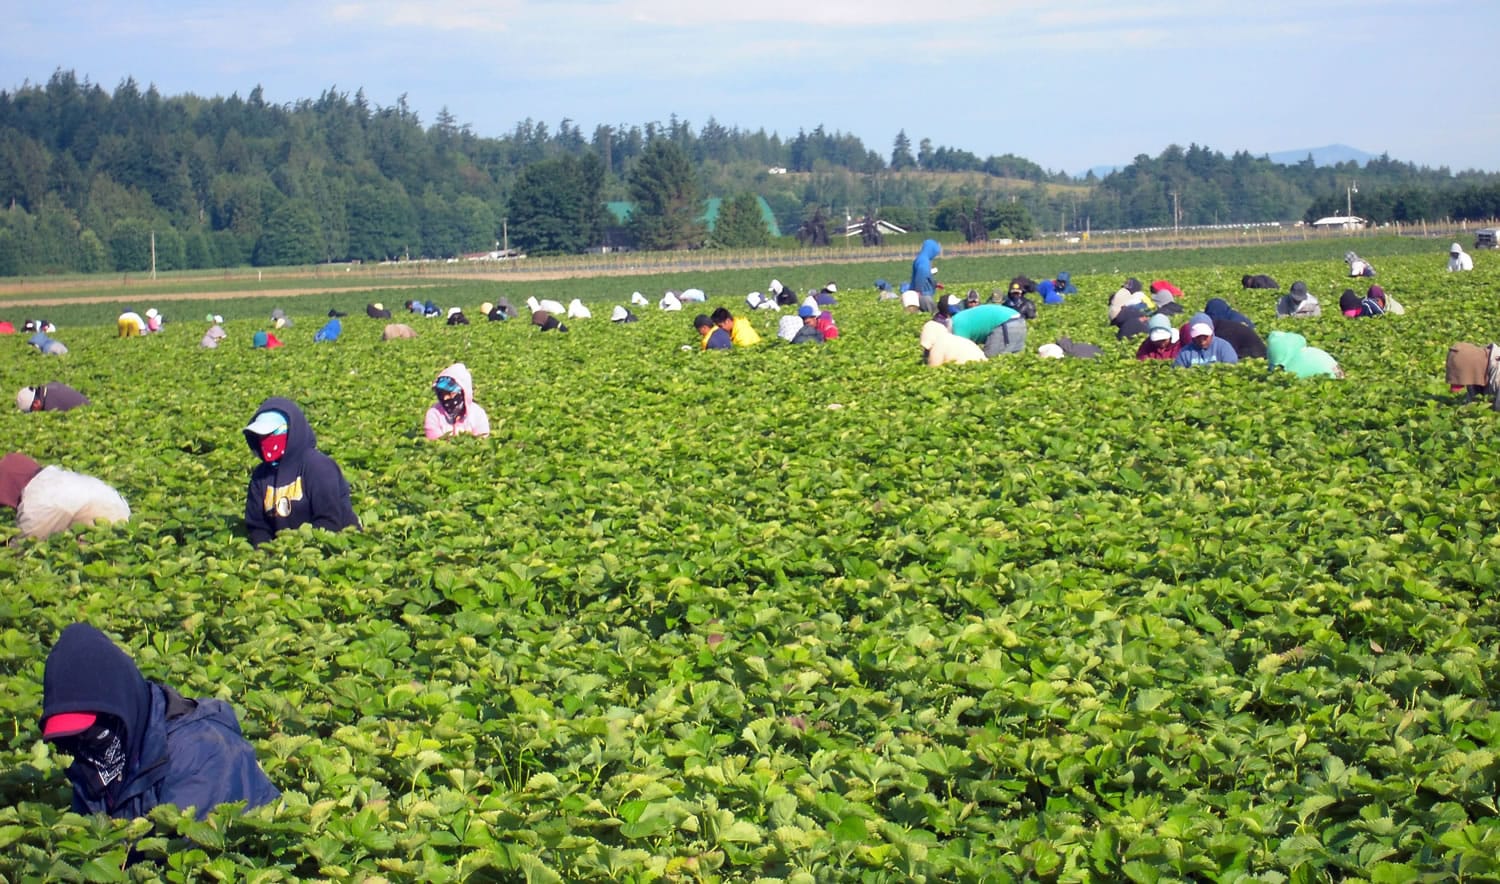 Employees pick strawberries on Steve Sakuma's farm outside of Burlington. On a hot mid-July morning, they wear long sleeves and pants, hoods, gloves and face masks as protection from pesticides.